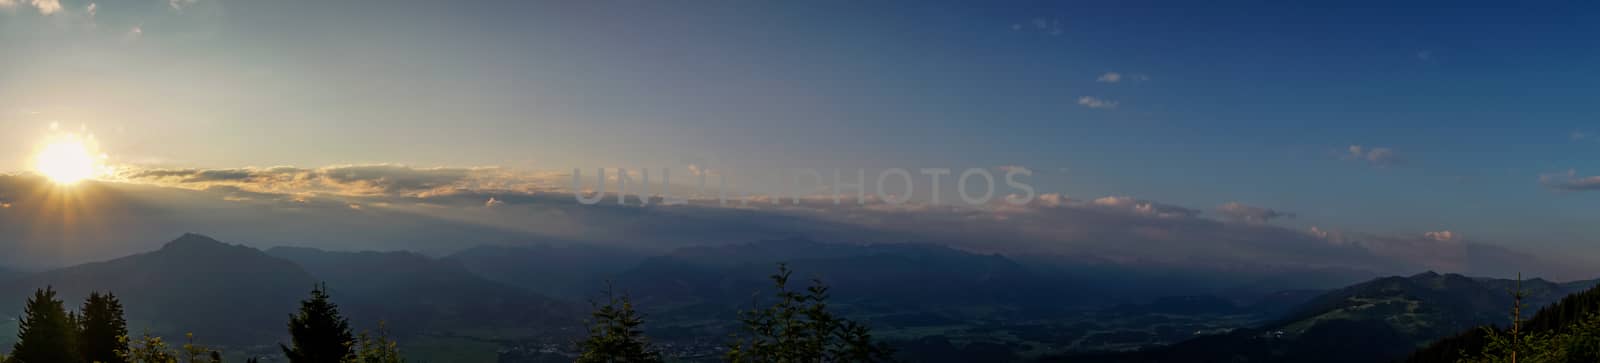 Sunrise hike at Immenstadt in Allgau to the summit of Mittag by mindscapephotos